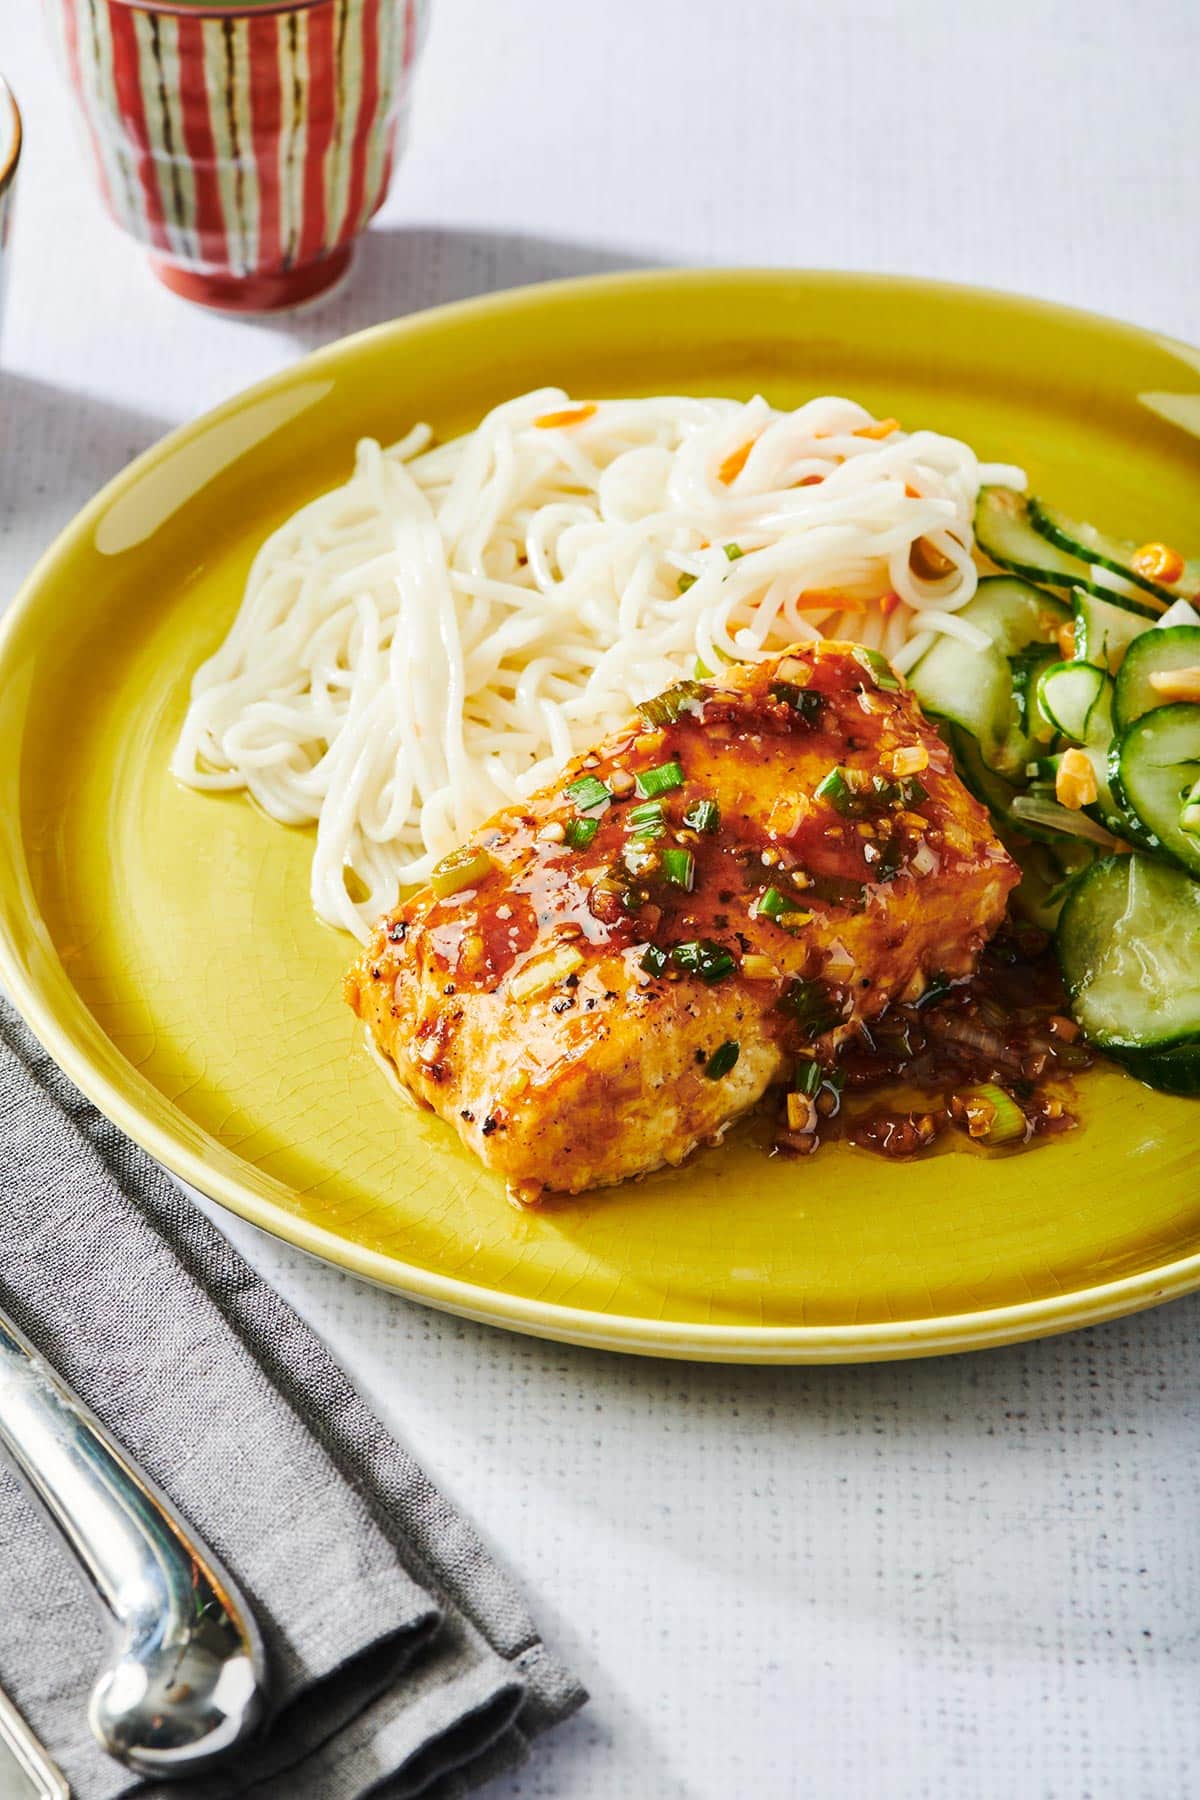 Ginger lemongrass salmon with noodles and cucumber salad on yellow plate.